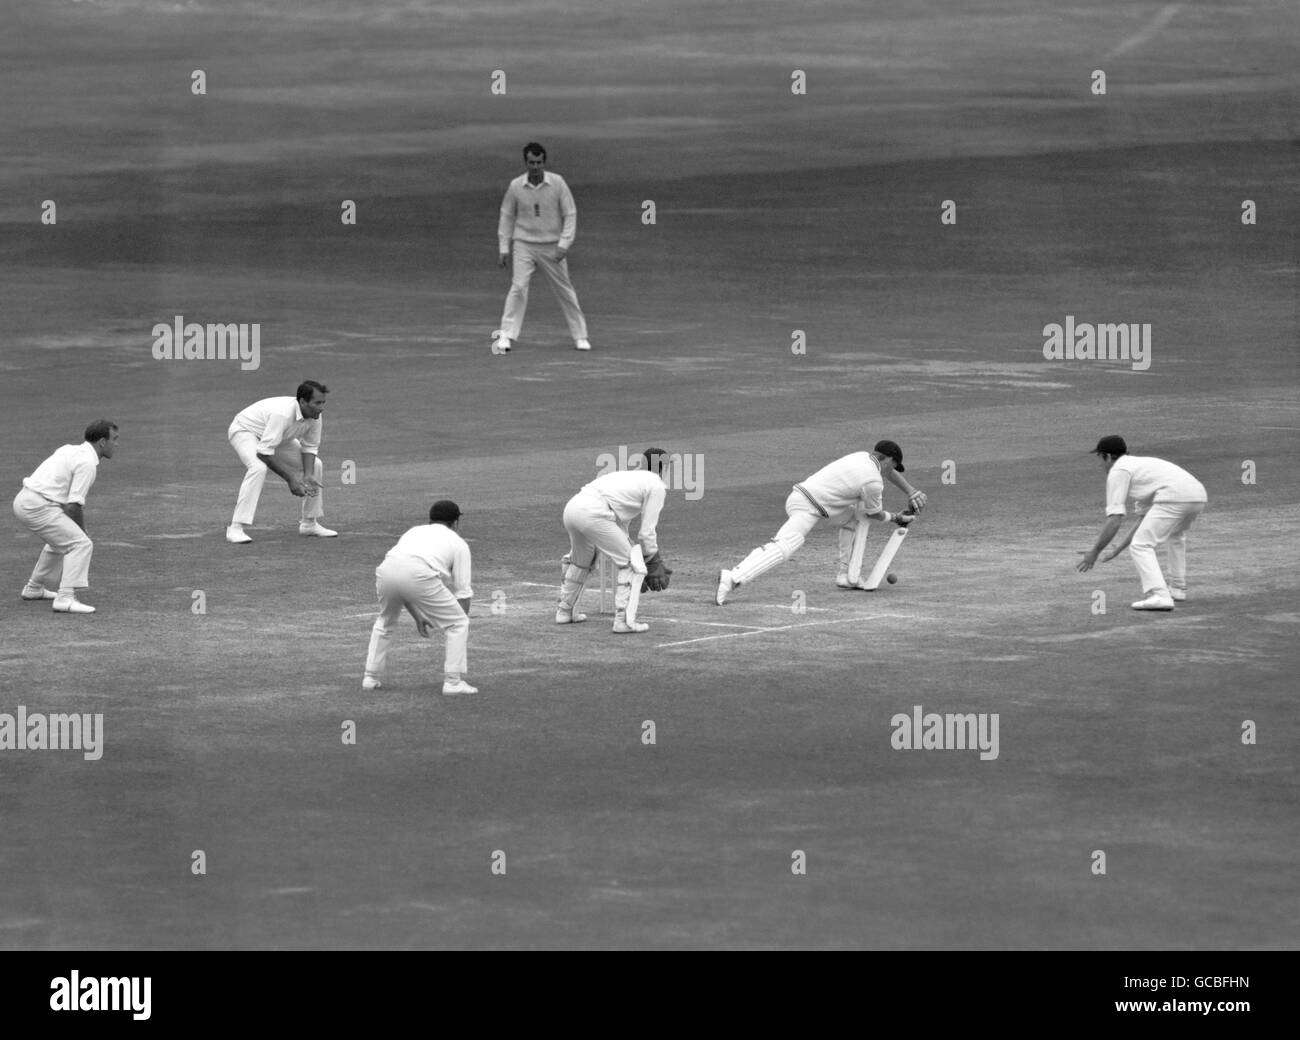 New Zealand's Glenn Turner in batting action on his way to reaching 43 not out in the second innings. Stock Photo